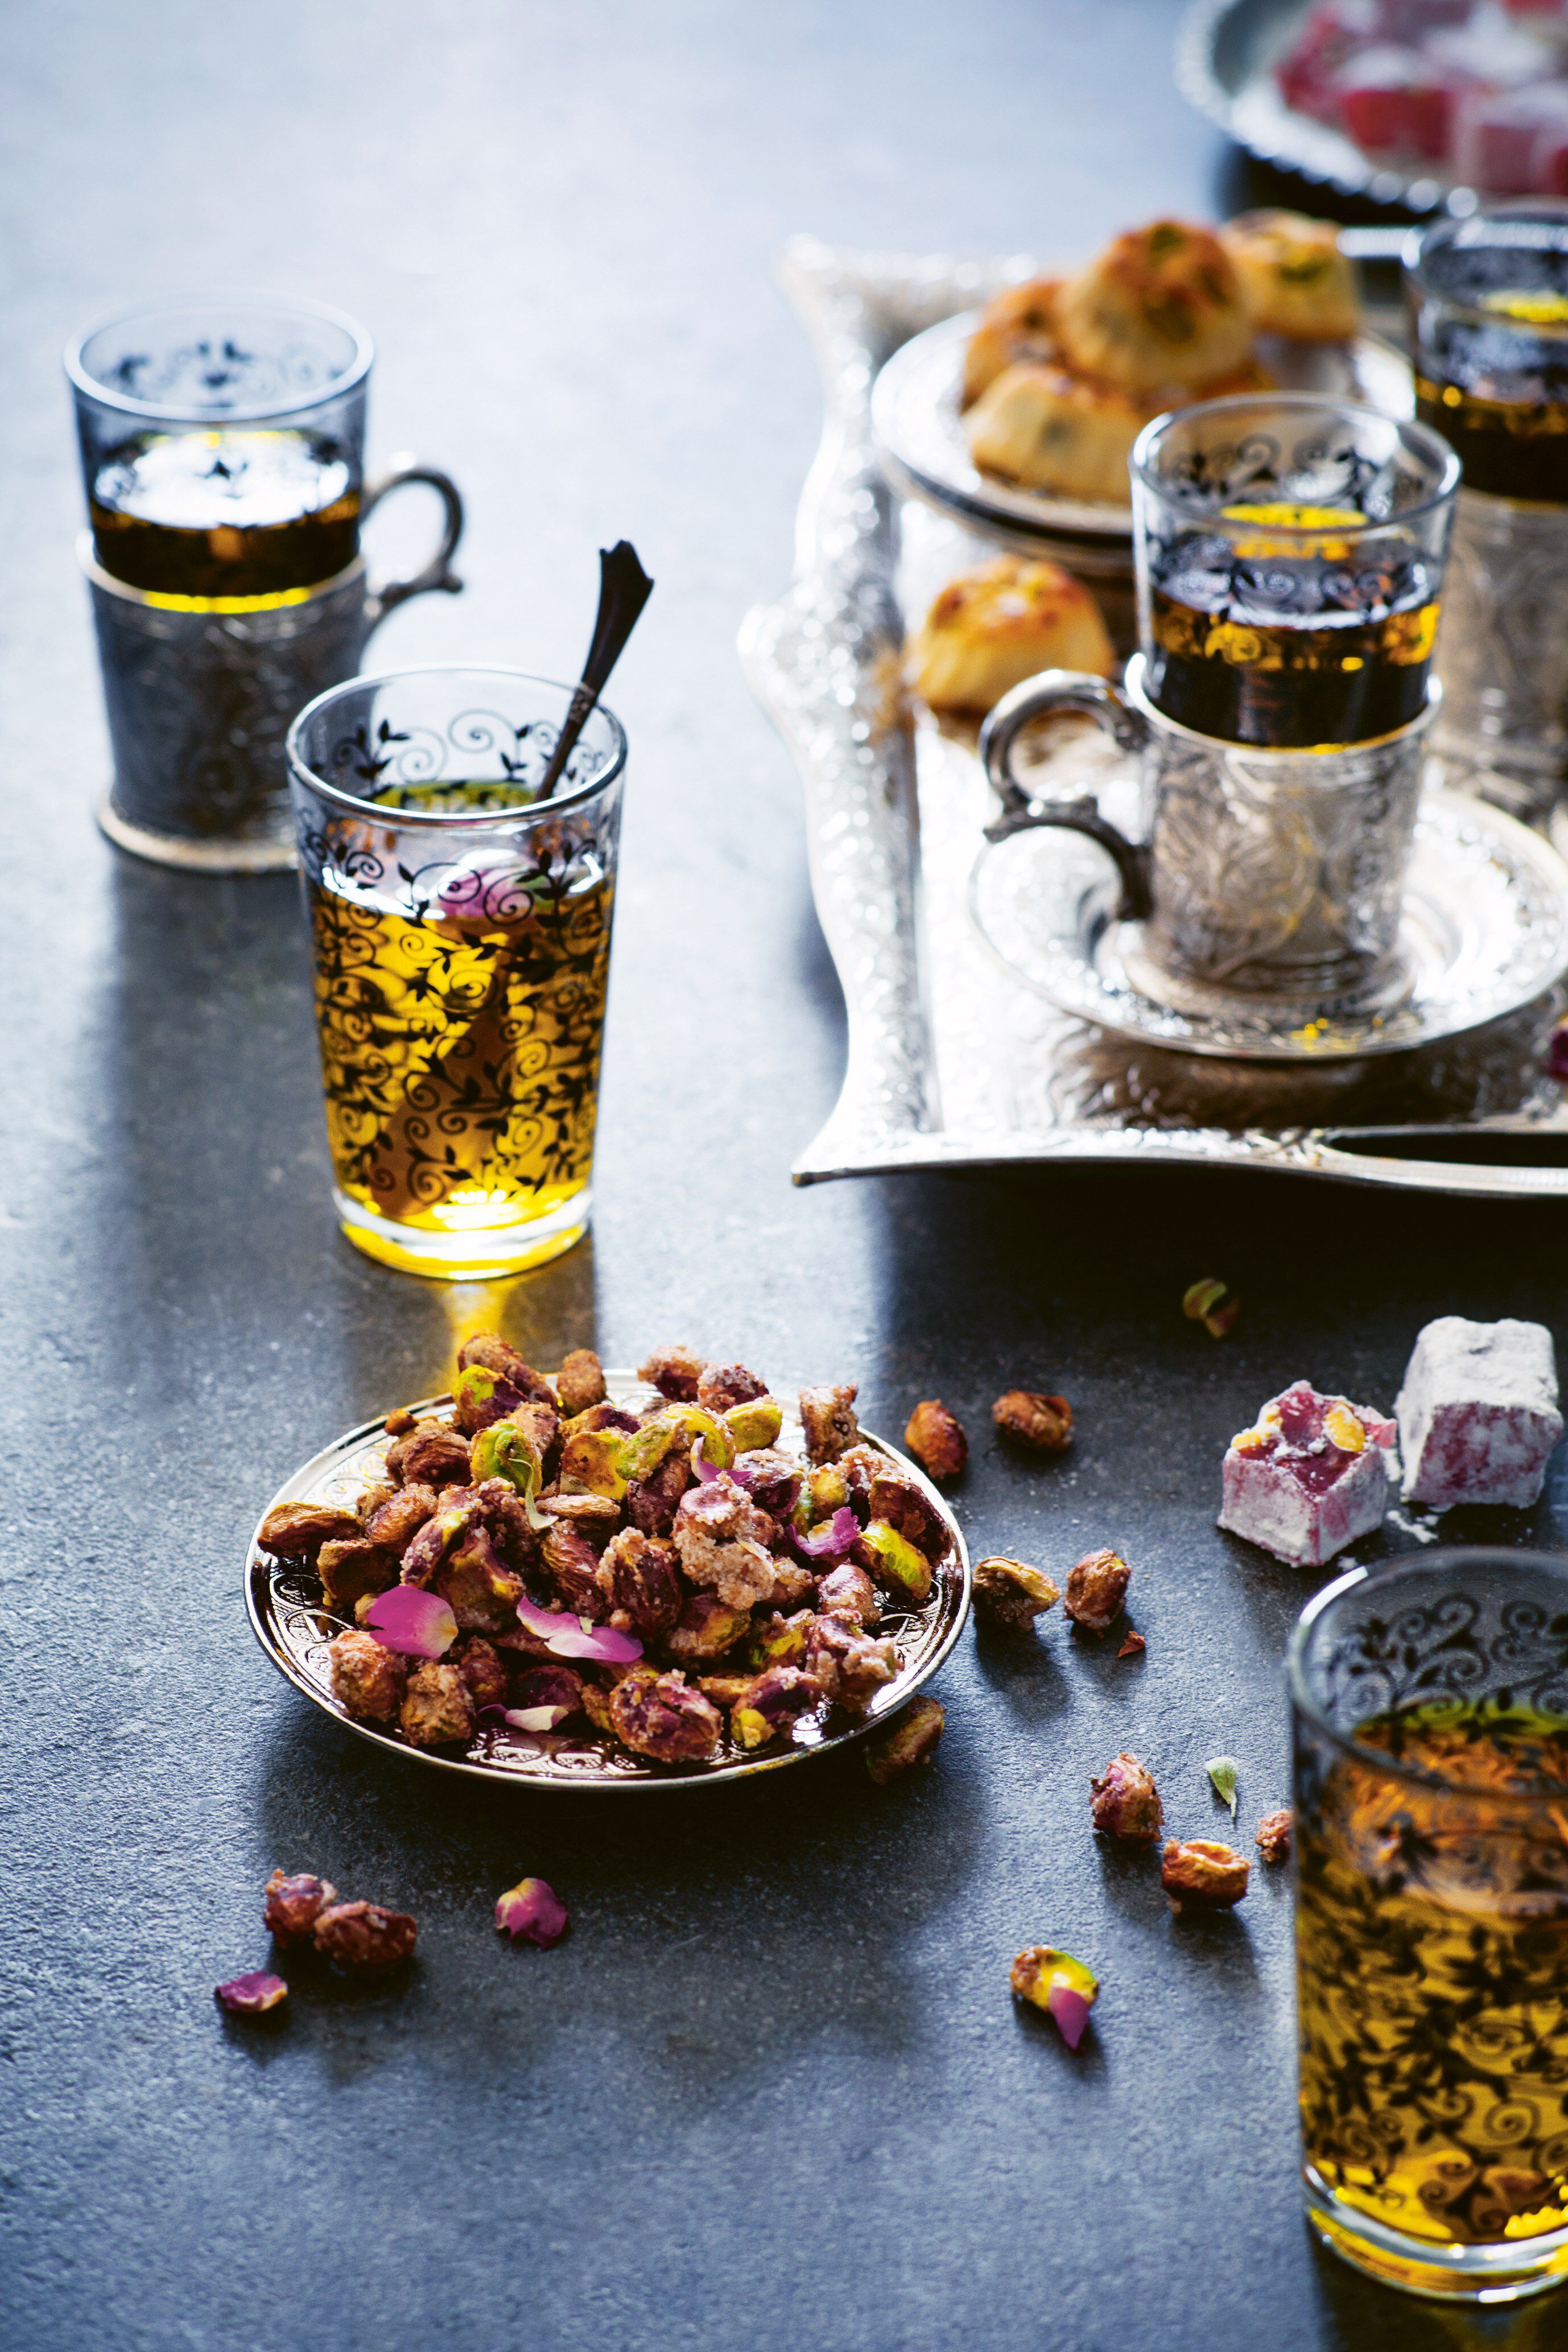 Step into the Persian kitchen with these 3 recipes